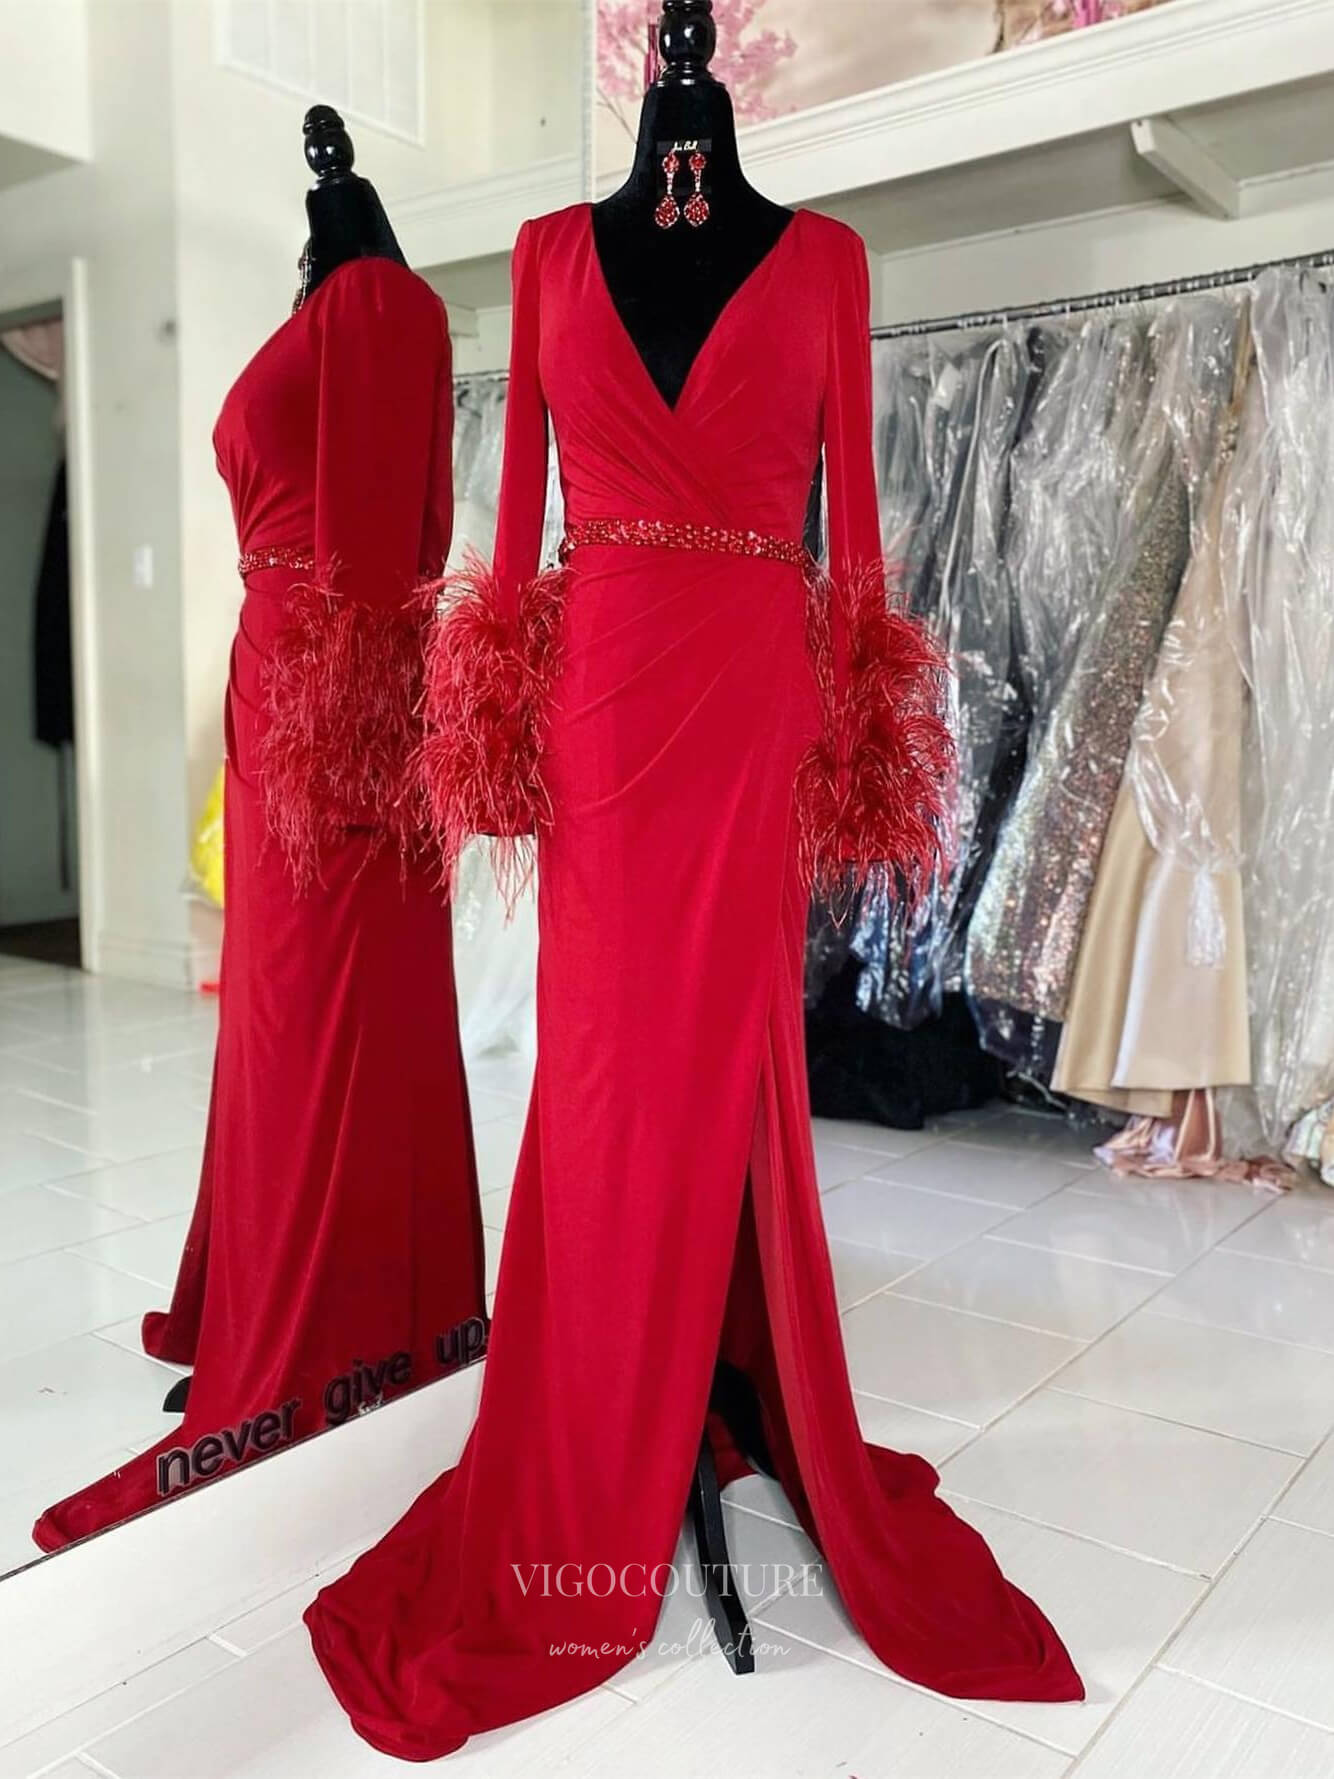 Red Long Sleeve Feather Sheath Prom Dresses with Slit V-Neck Beaded Belt 24174-Prom Dresses-vigocouture-Red-Custom Size-vigocouture